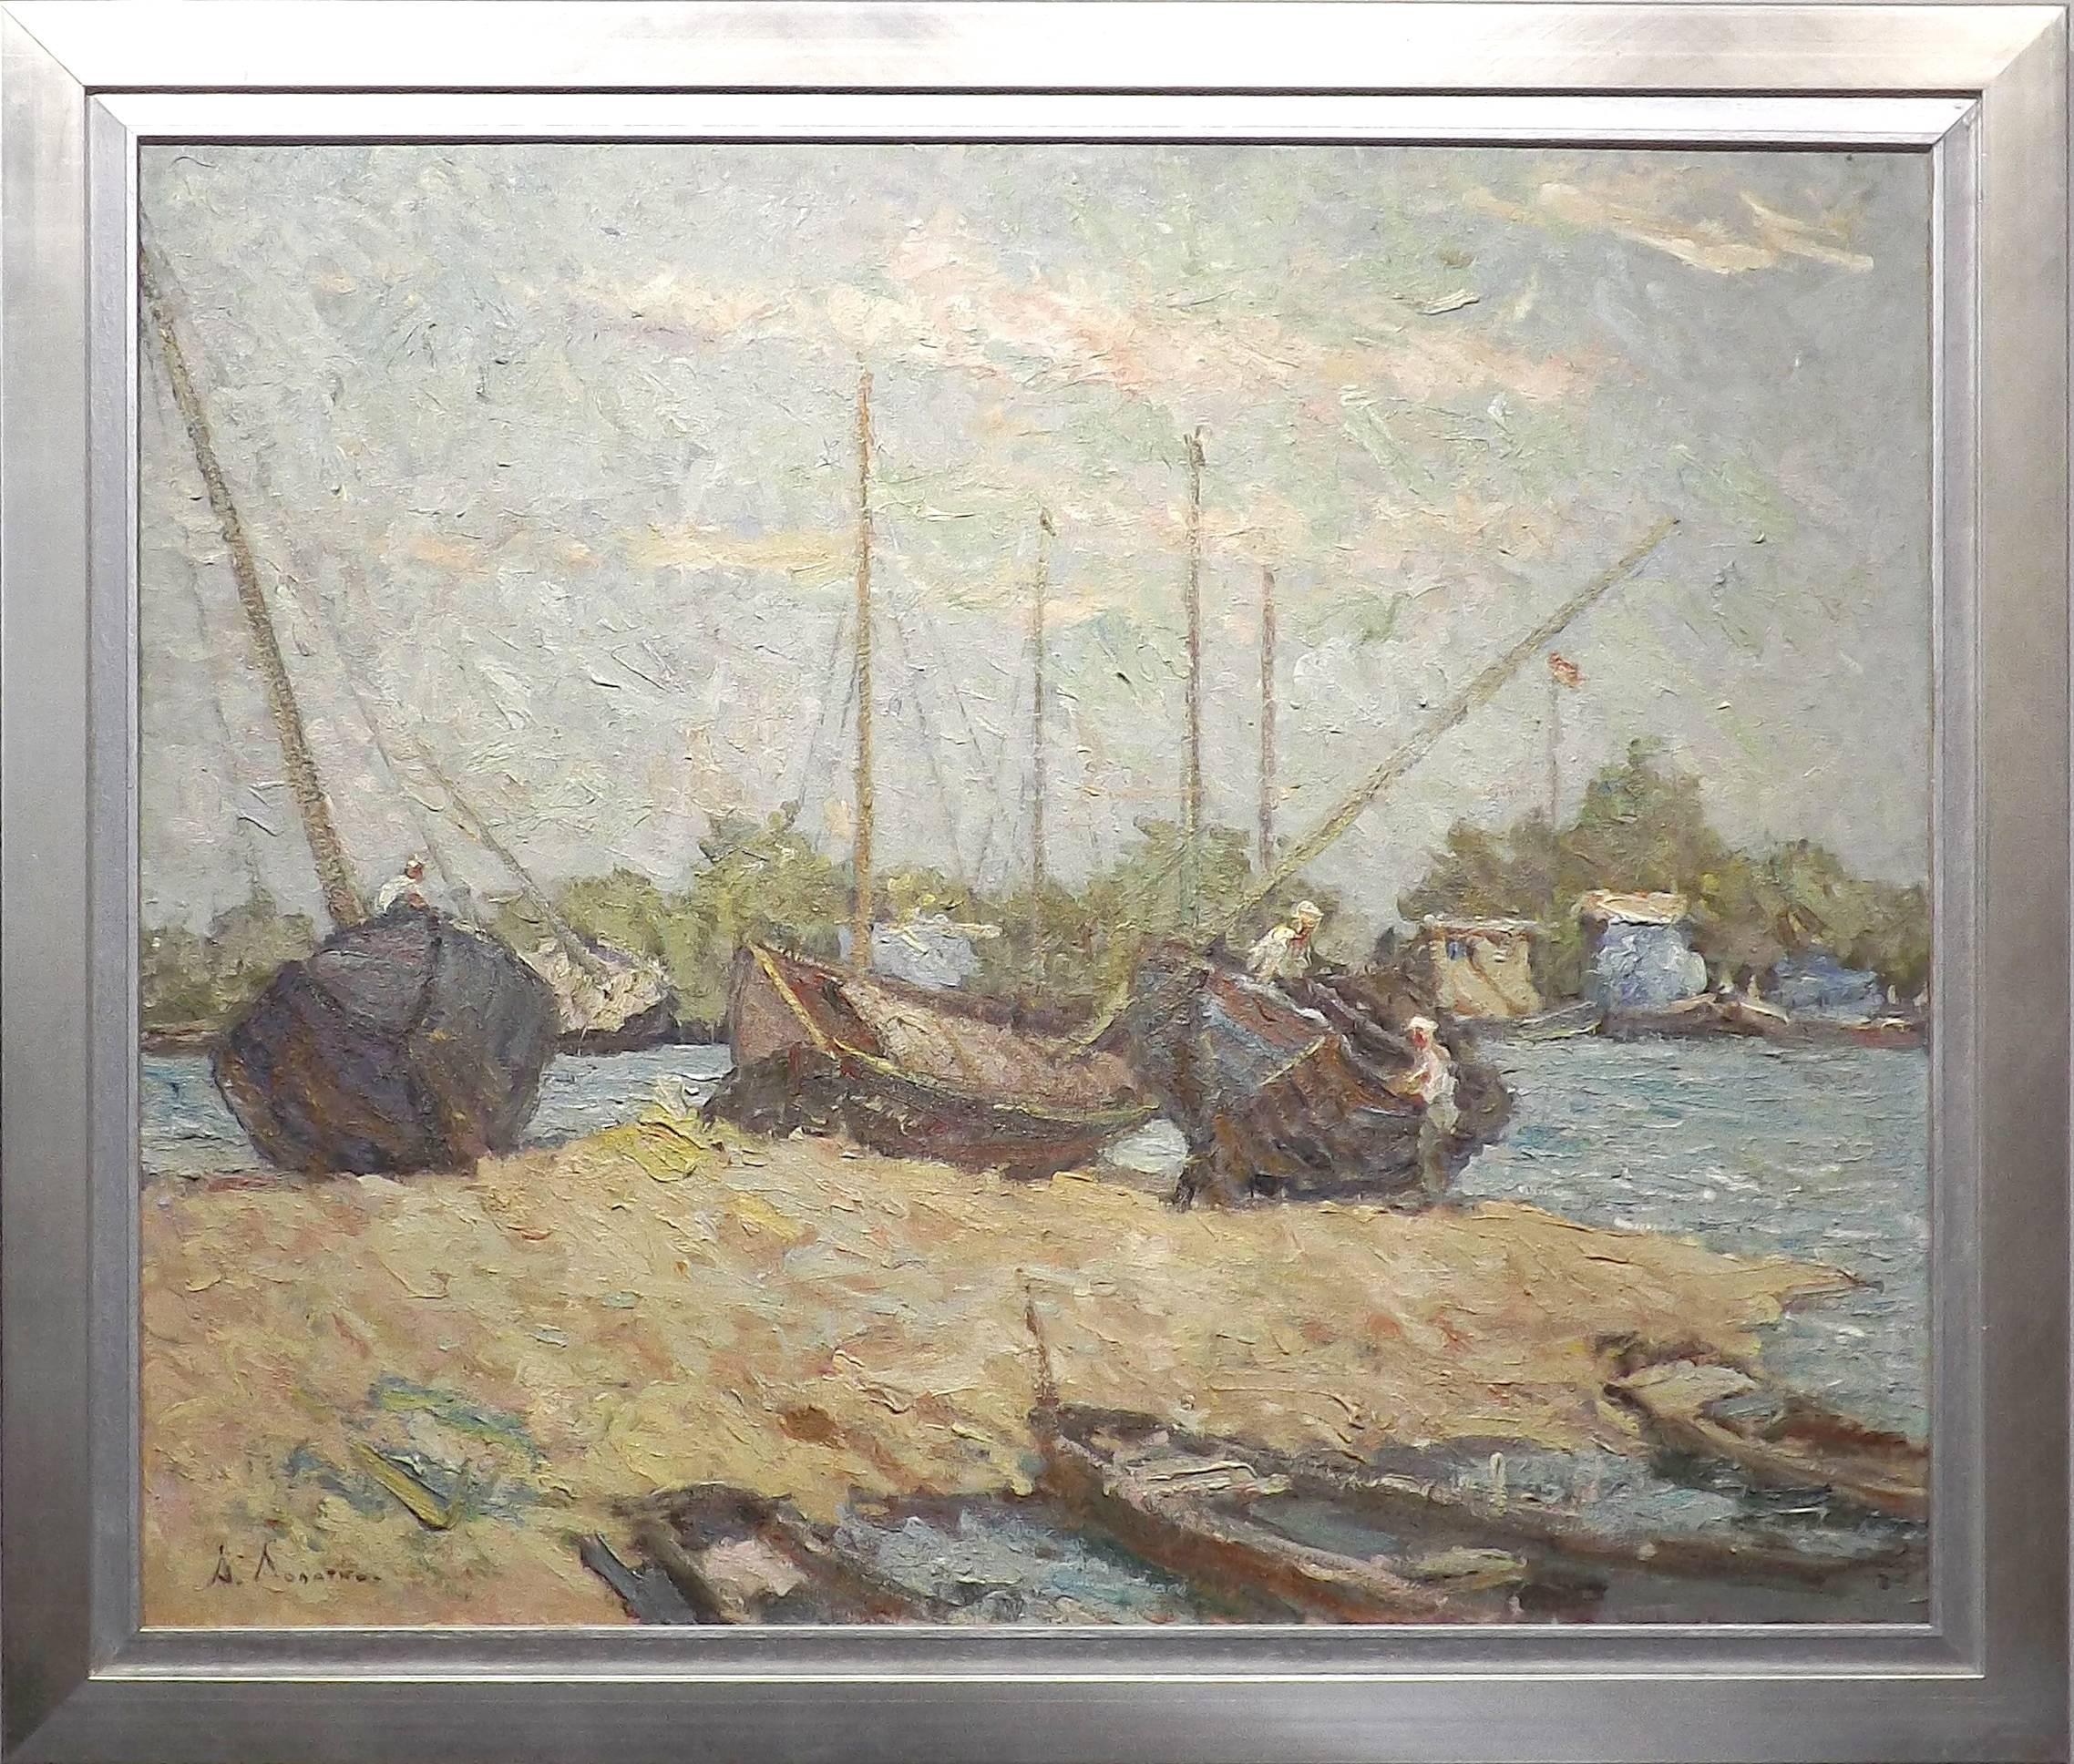 A group of men are busy making repairs to some boats in this majestic painting by well listed Russian artist Alexander Lopatkin. Large, heavy brushstrokes recreate the lapping waves and early morning grey sky of a small river harbor.

Lopatkin was